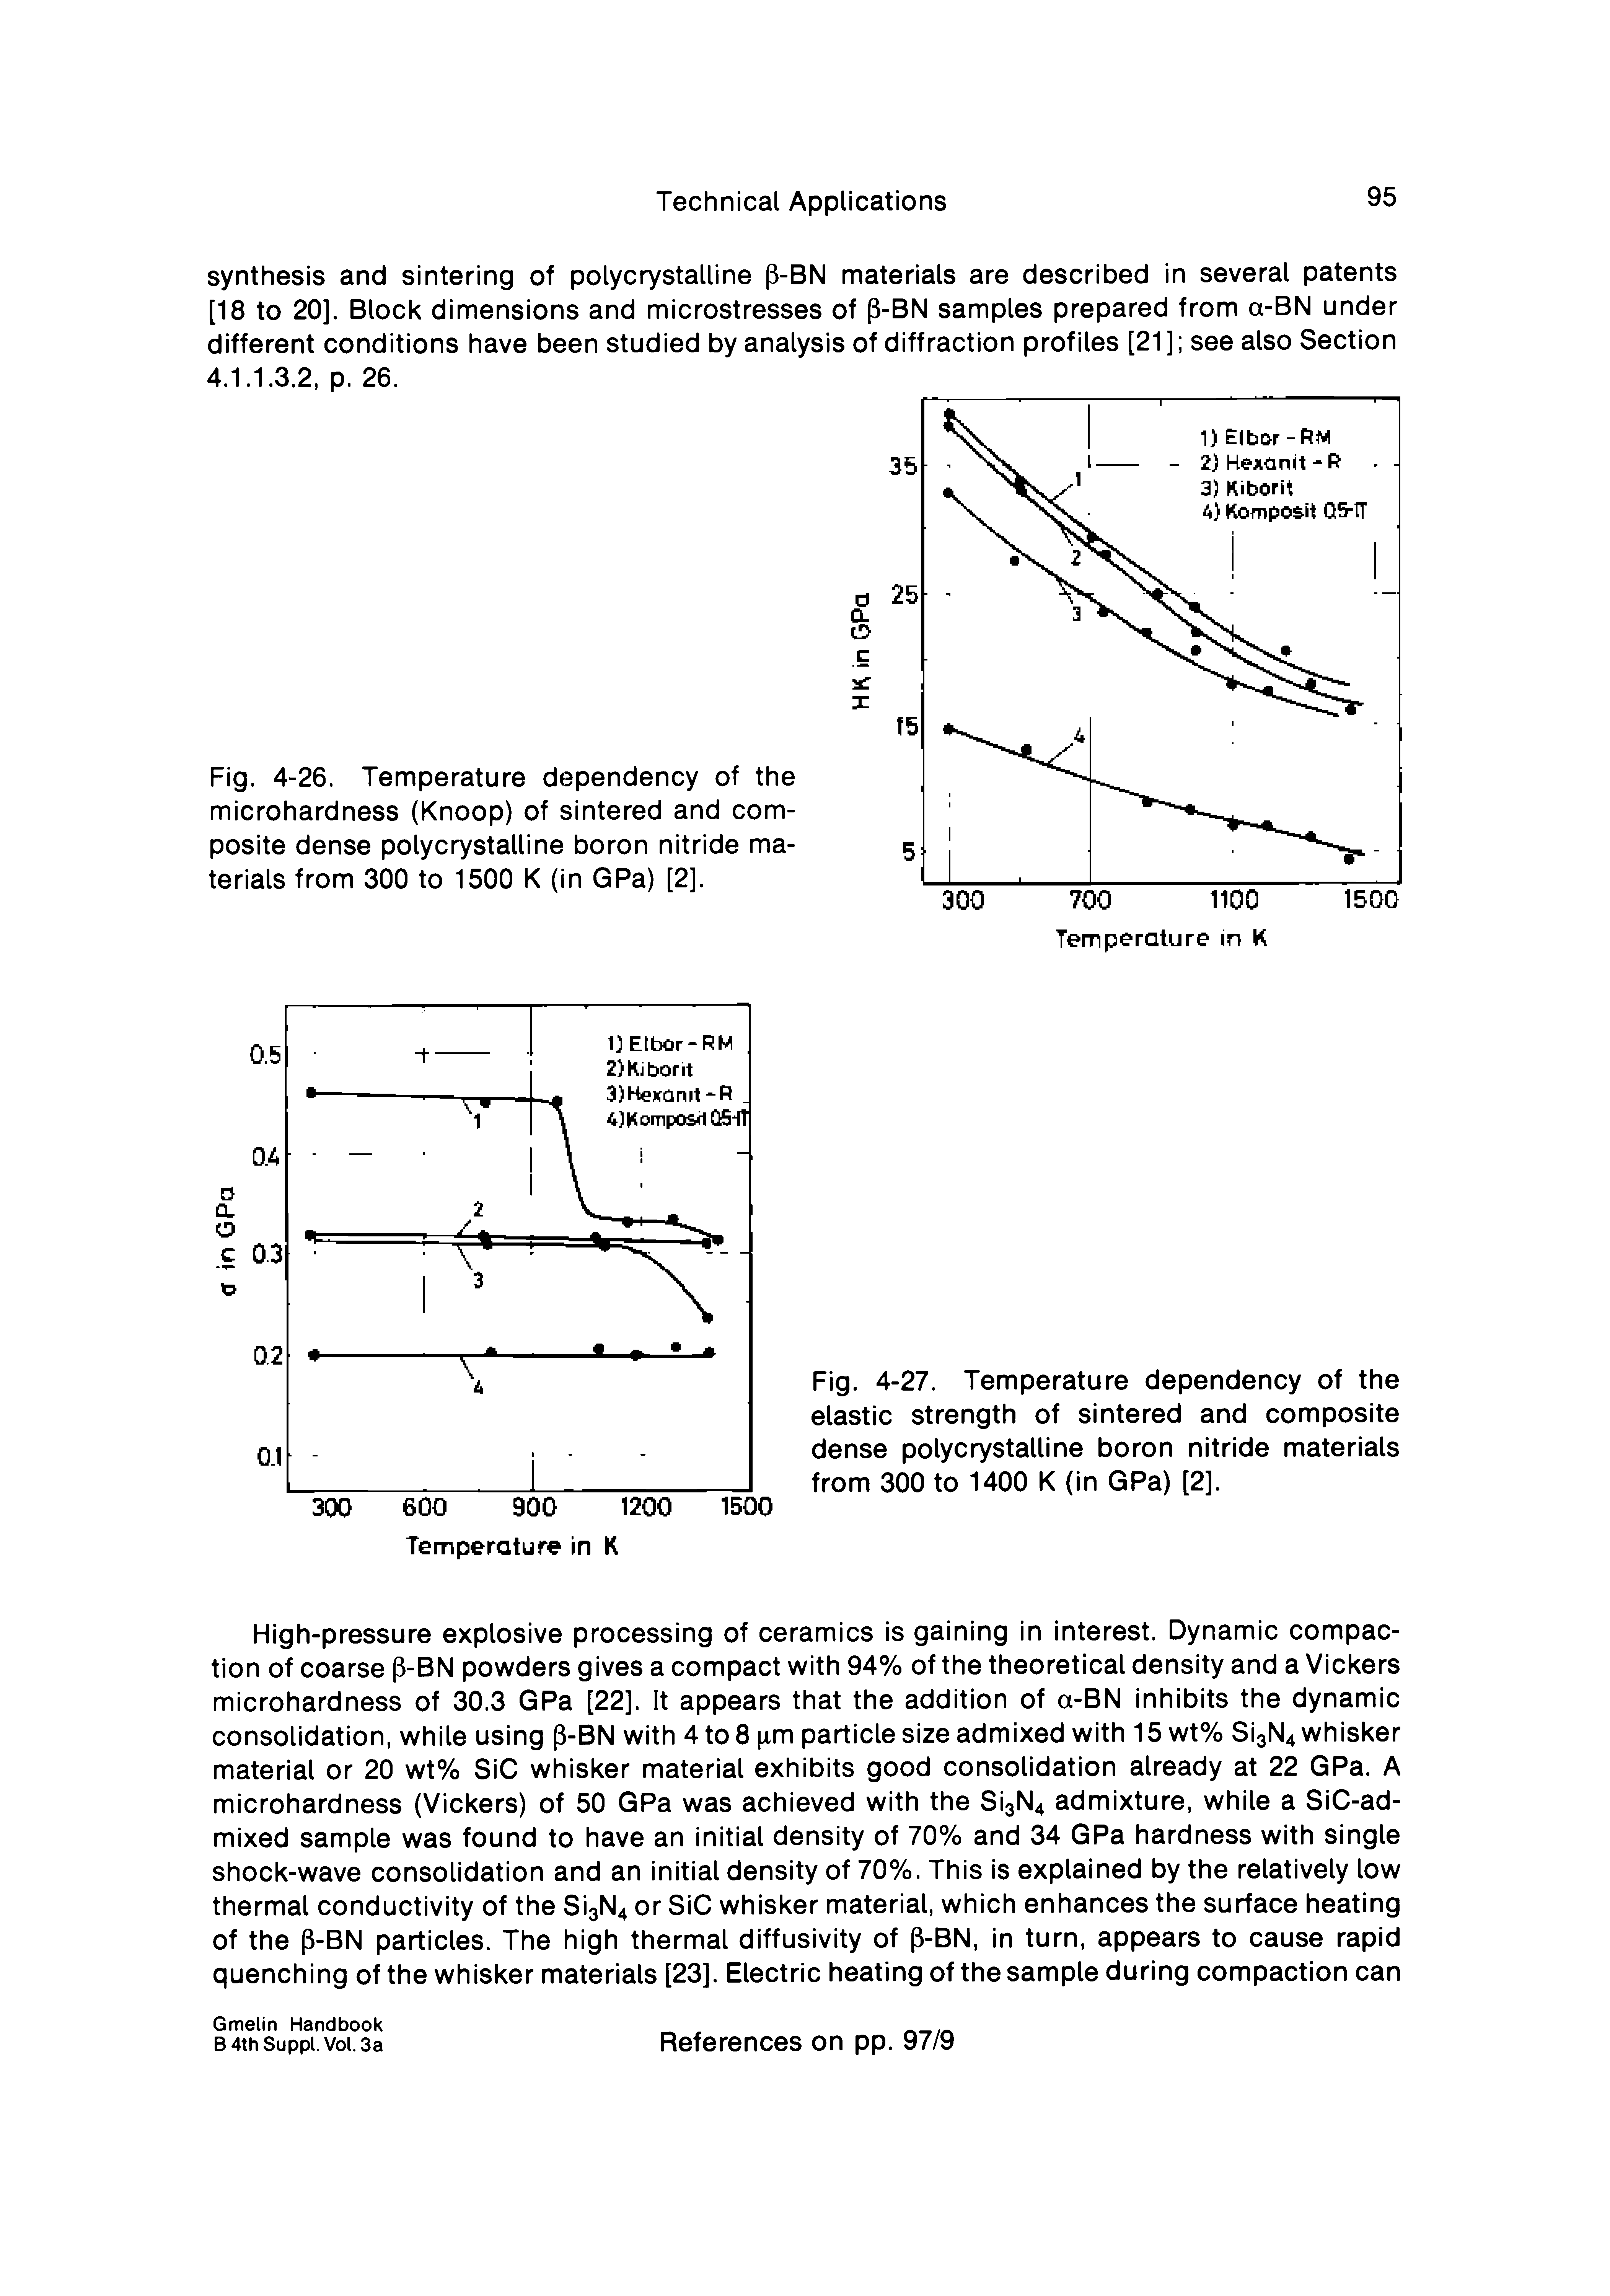 Fig. 4-26. Temperature dependency of the microhardness (Knoop) of sintered and composite dense polycrystalline boron nitride materials from 300 to 1500 K (in GPa) [2].